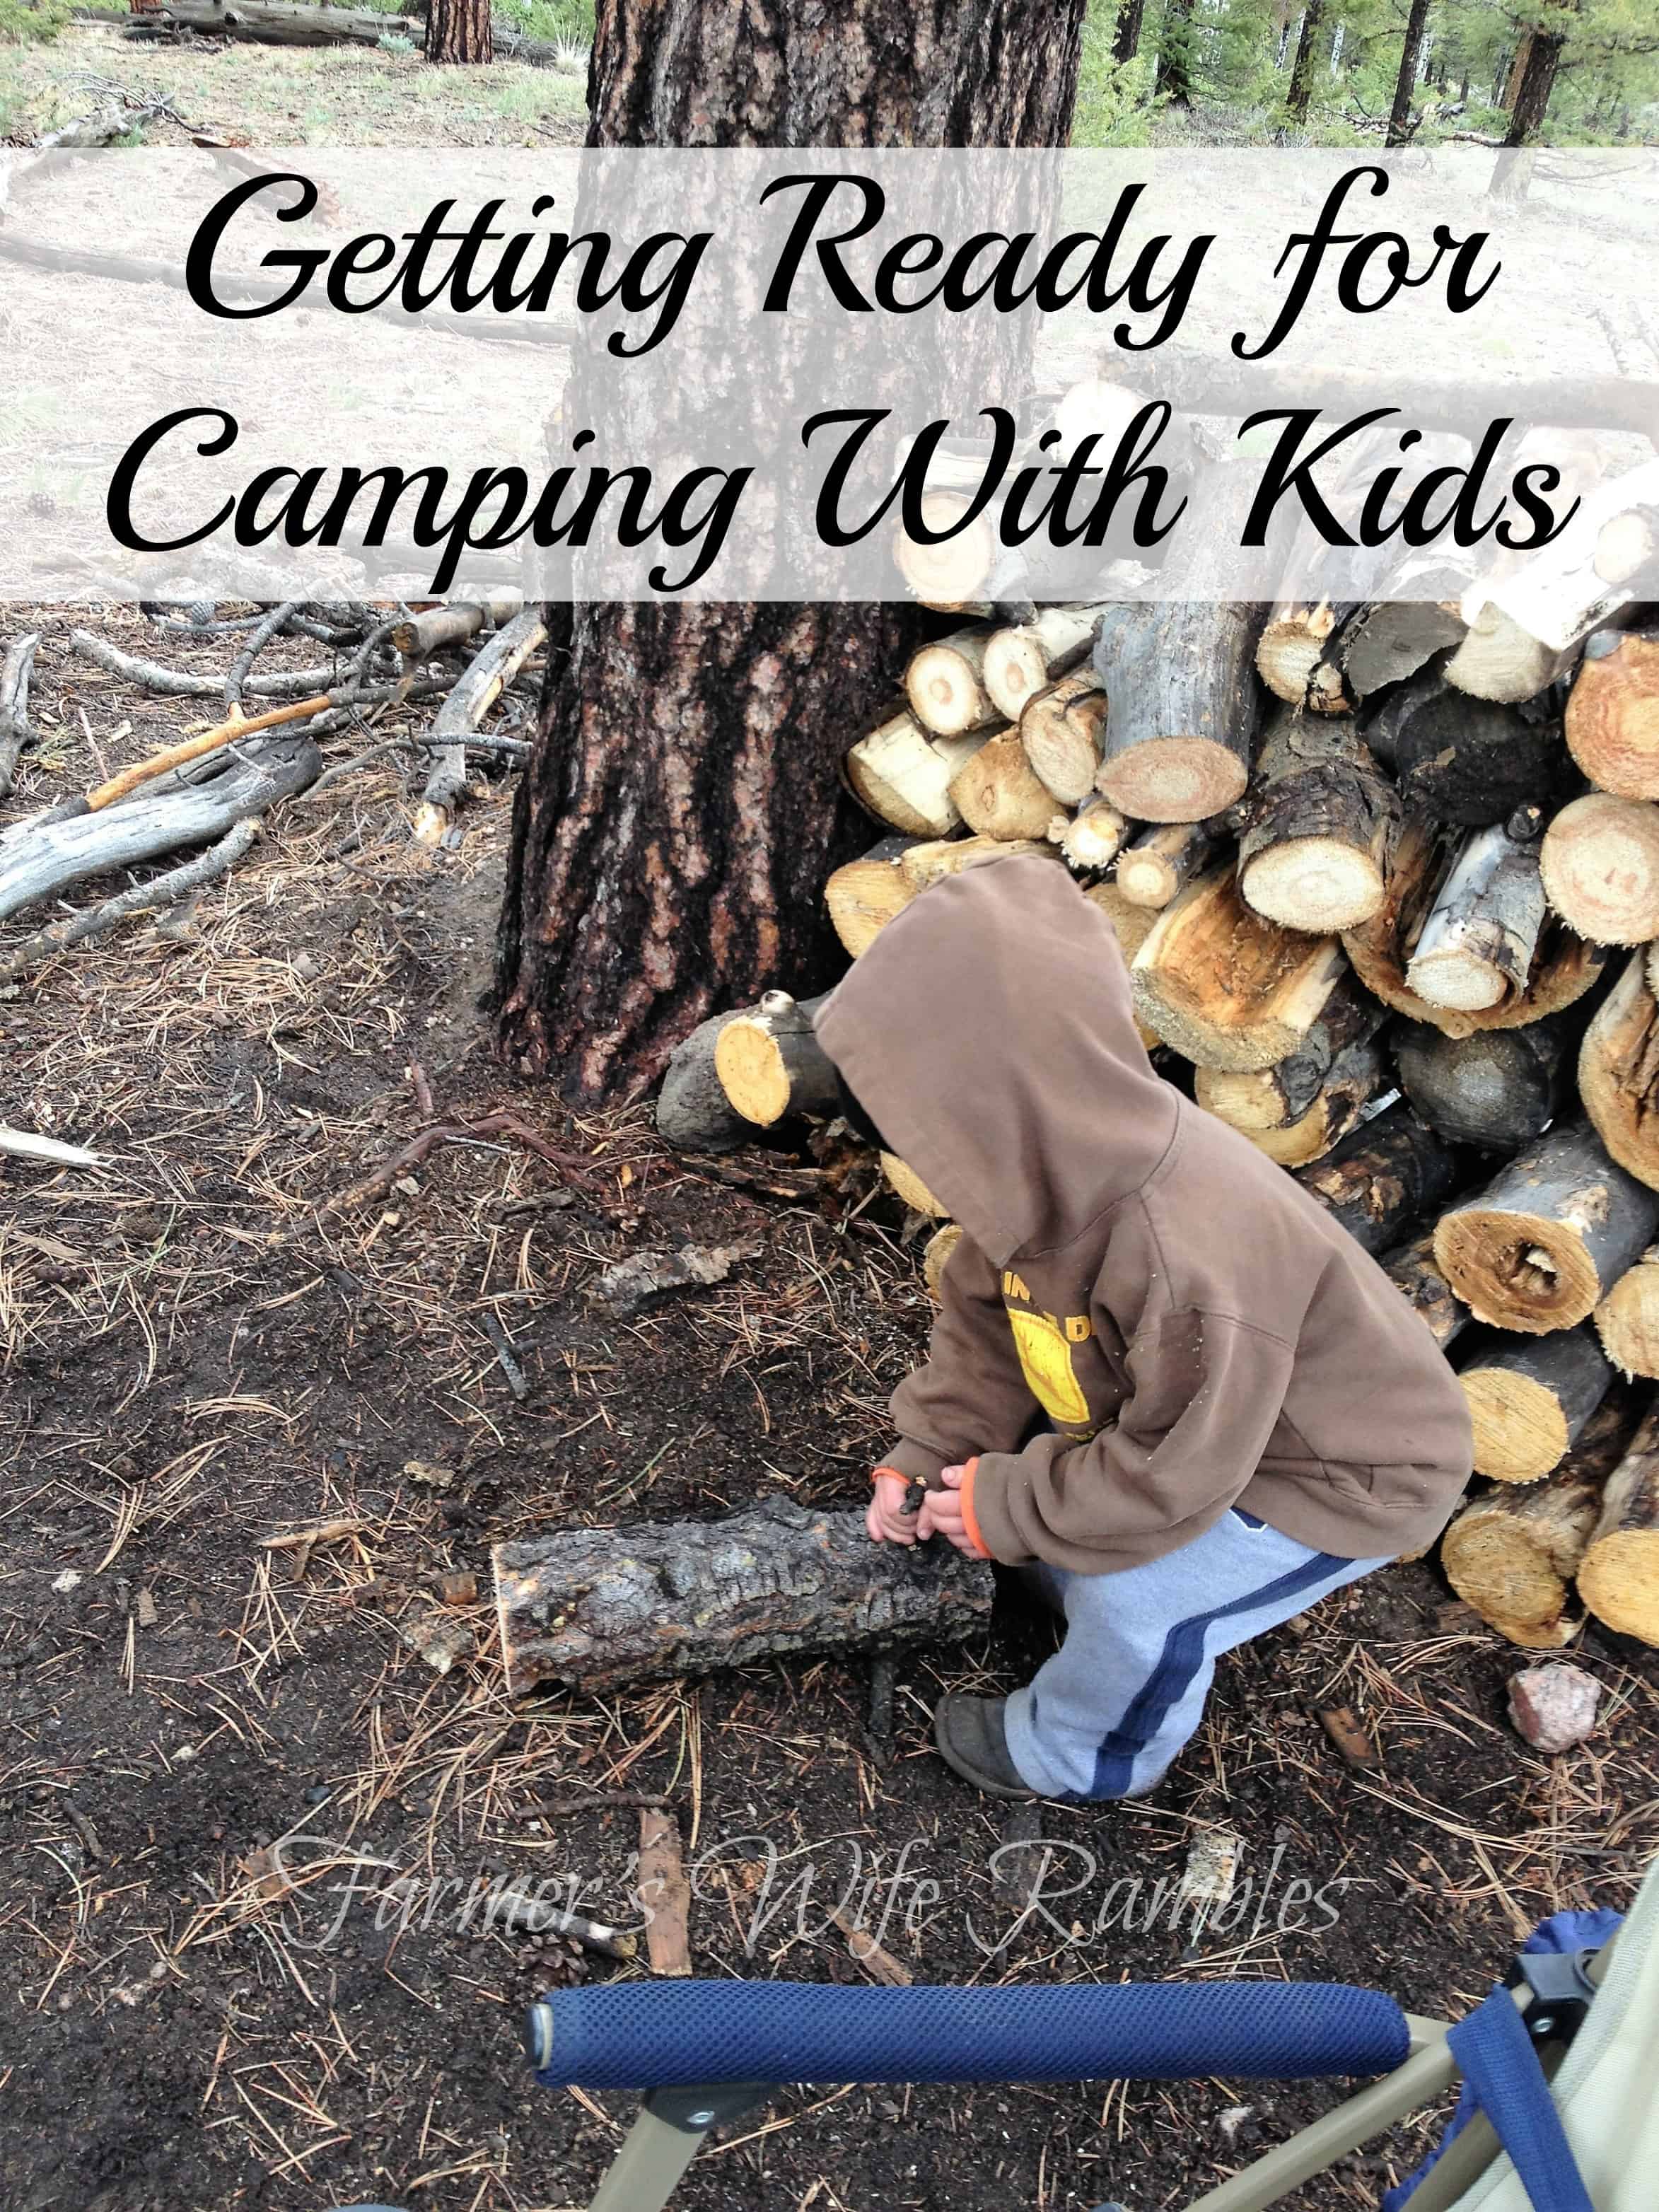 Getting Ready for Camping With Kids - Farmer's Wife Rambles